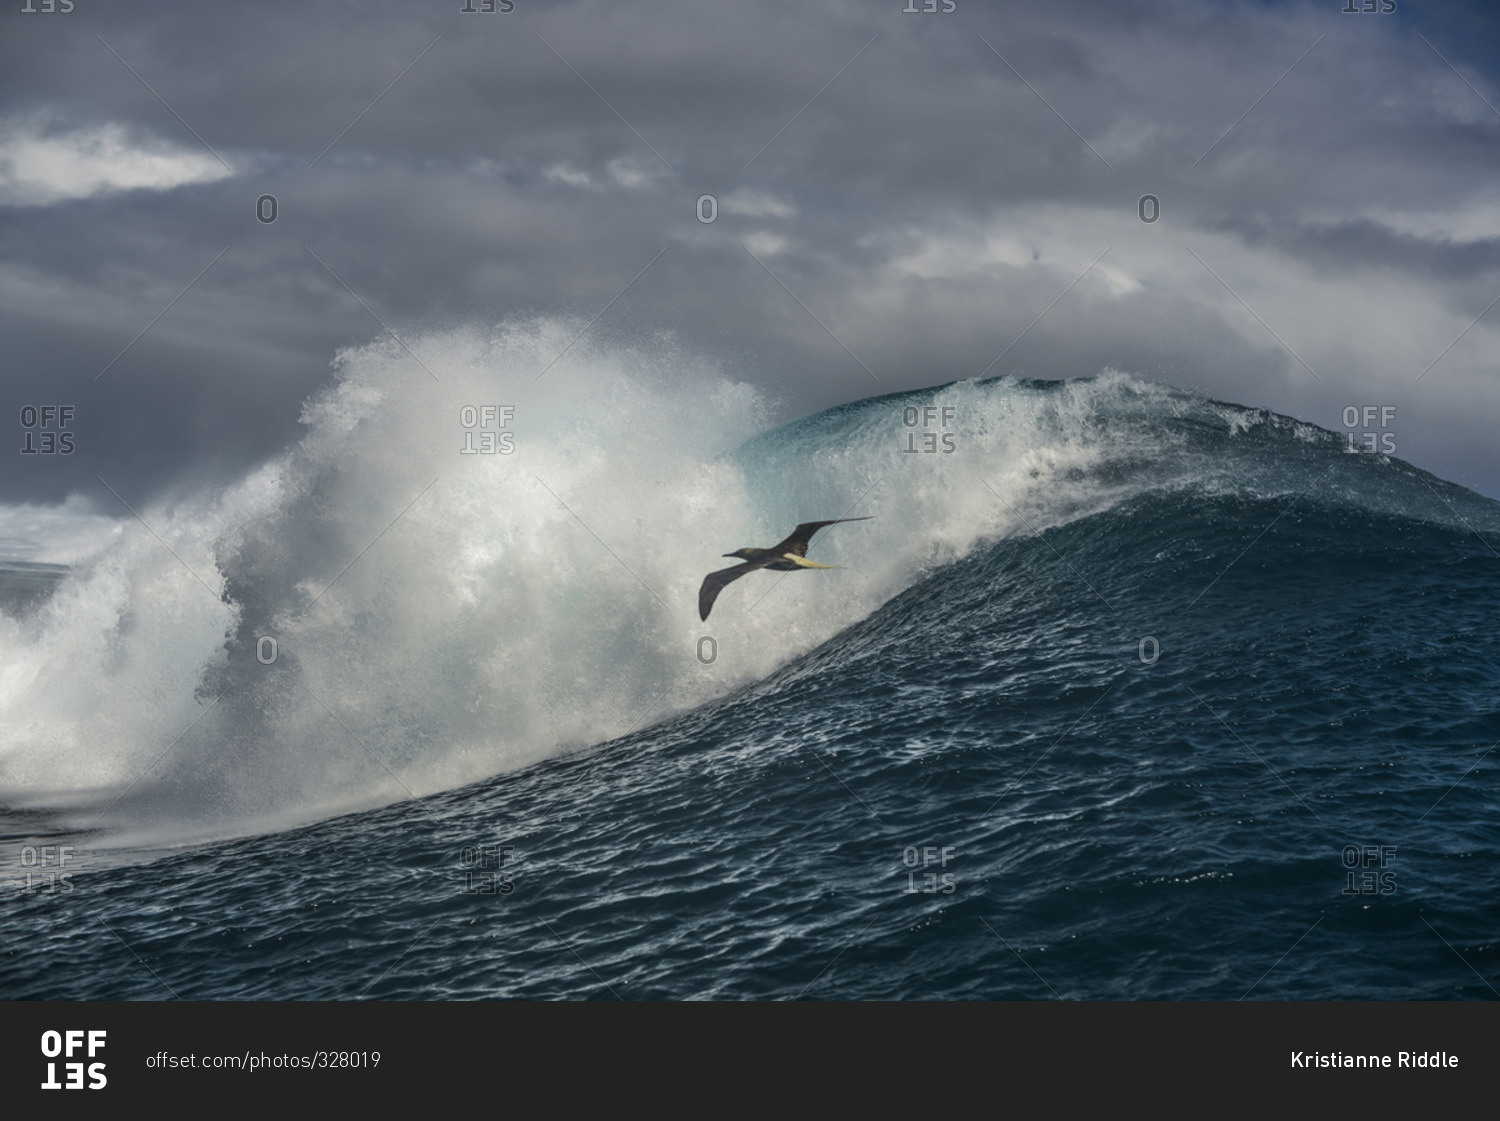 Bird flying above a breaking wave in the Pacific Ocean by Moorea Island, French Polynesia